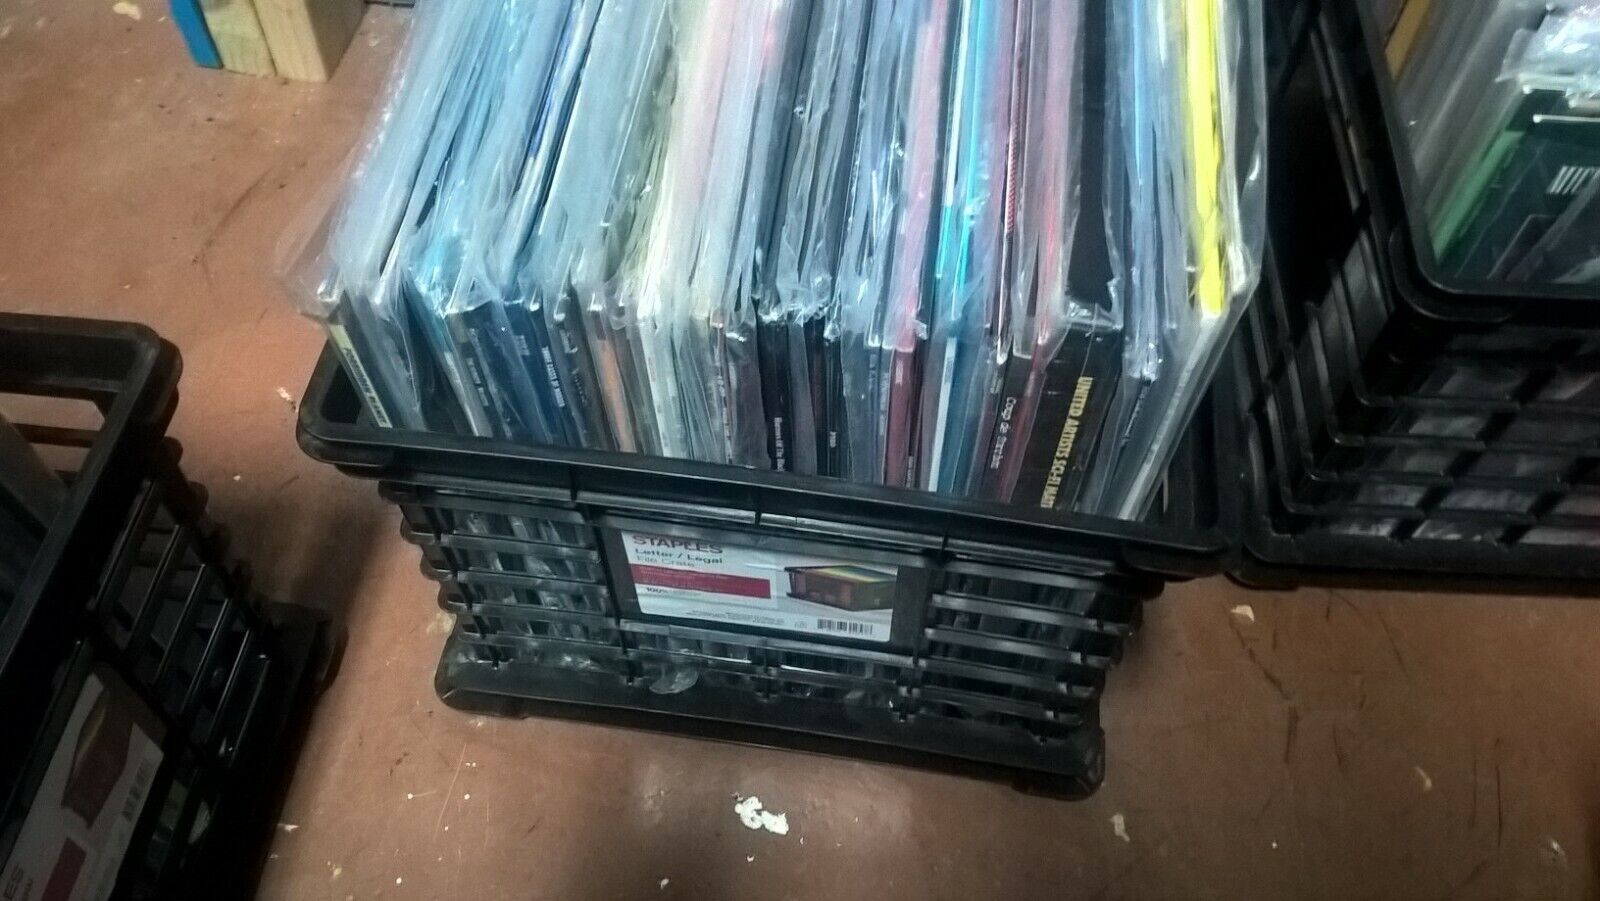 BUILD YOUR OWN LASERDISC LIBRARY...PICK ANY 5 DISCS FOR $20